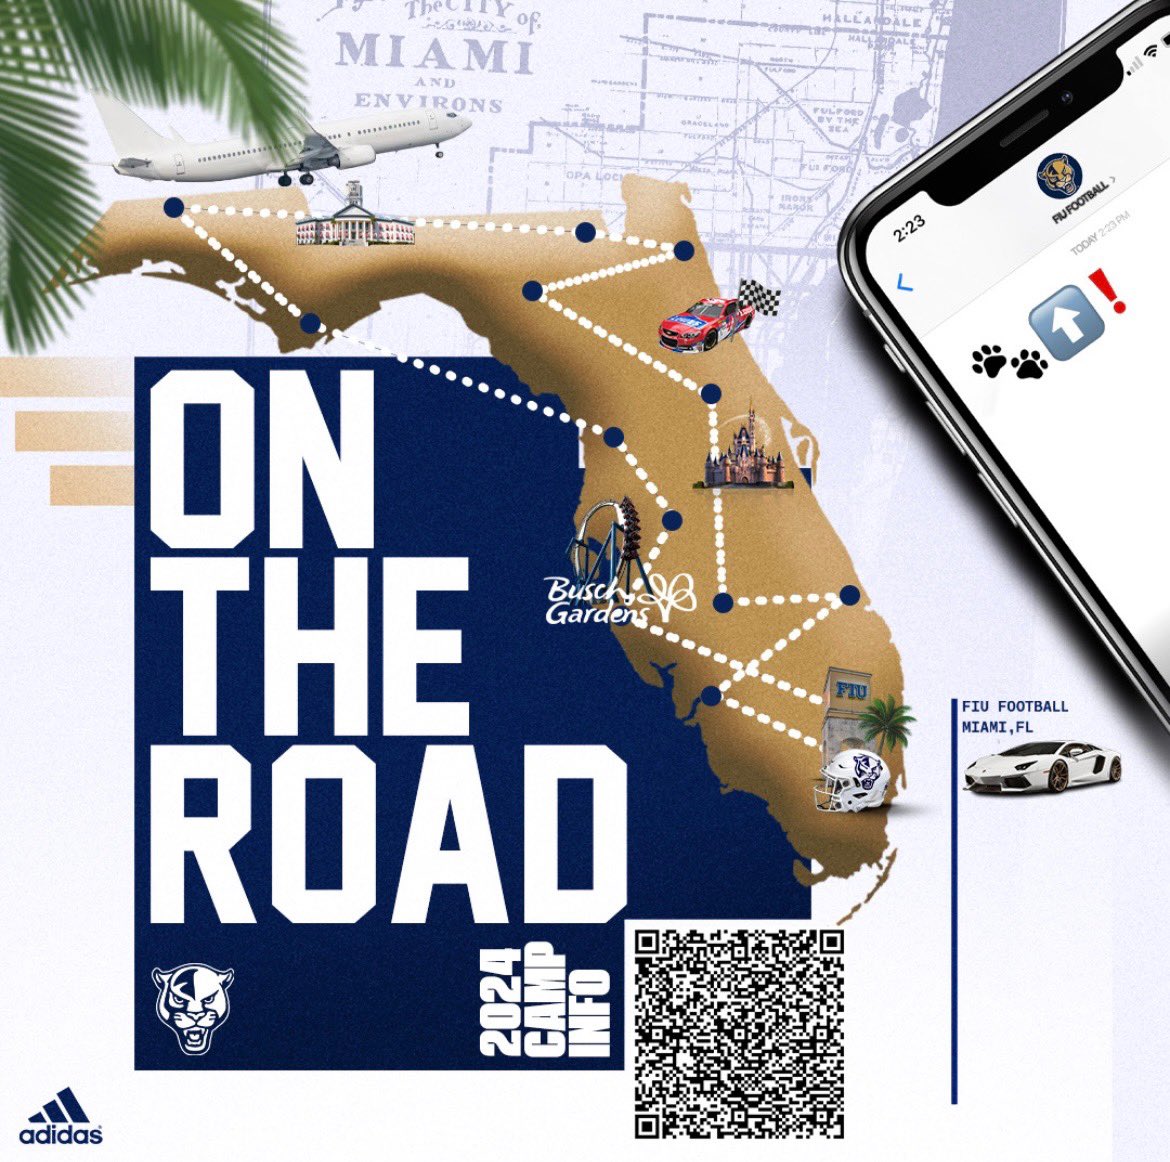 Let’s get it!!!! Spring Ball time in the Sunshine State!!! IT’S LIVE IN THE 305‼️ @FIUFootball